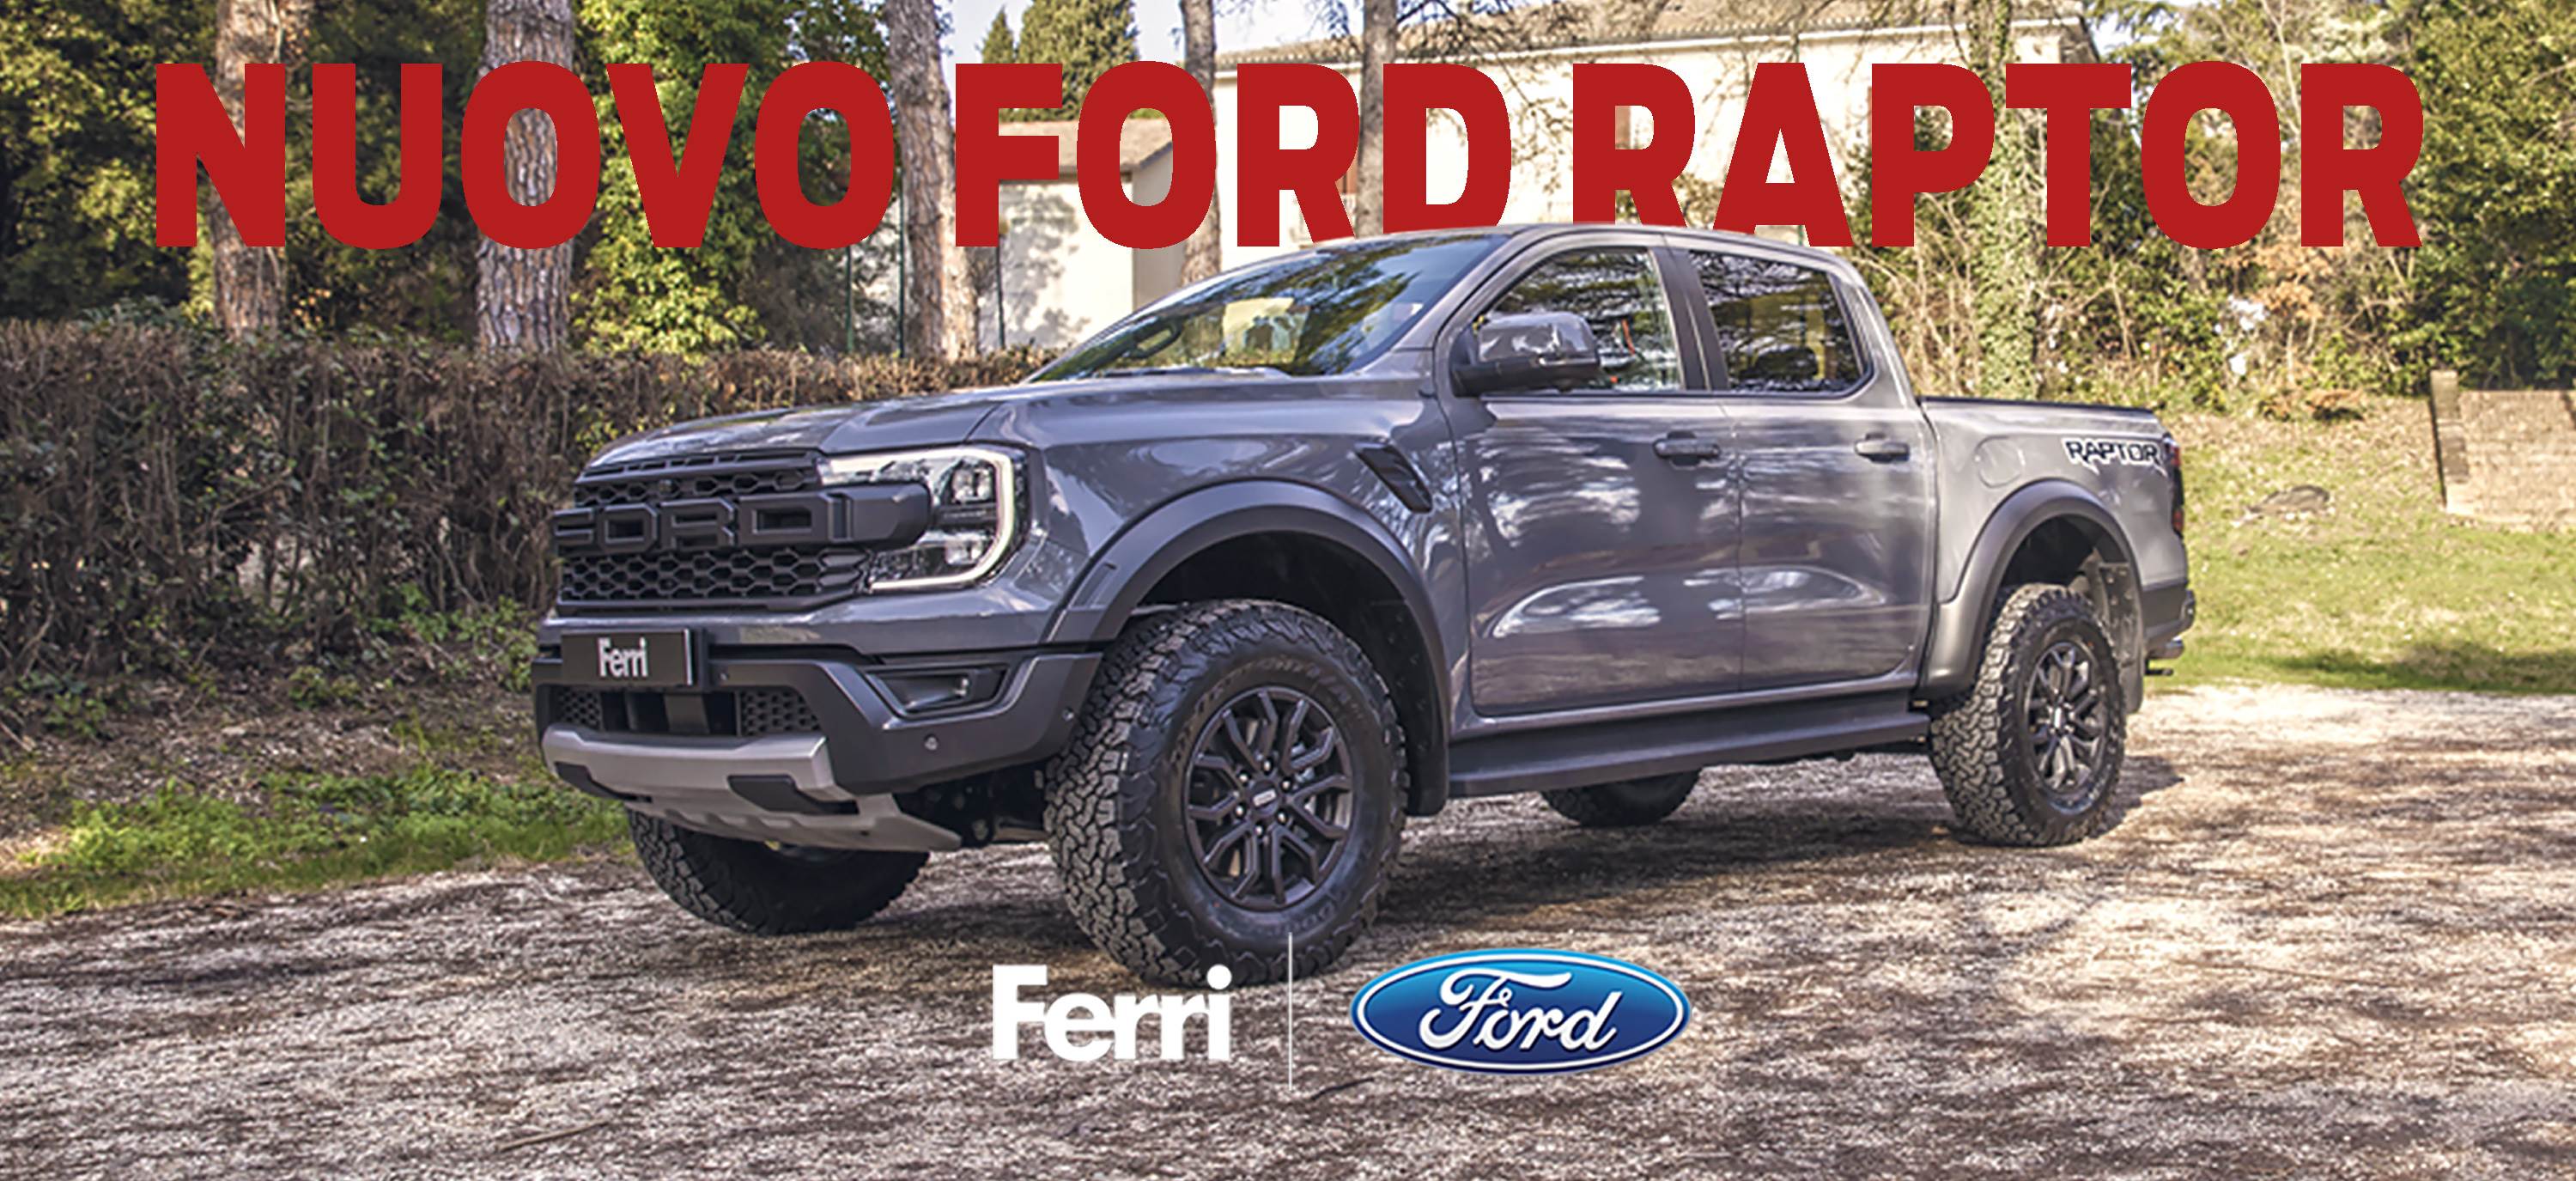 Nuovo Ford Raptor